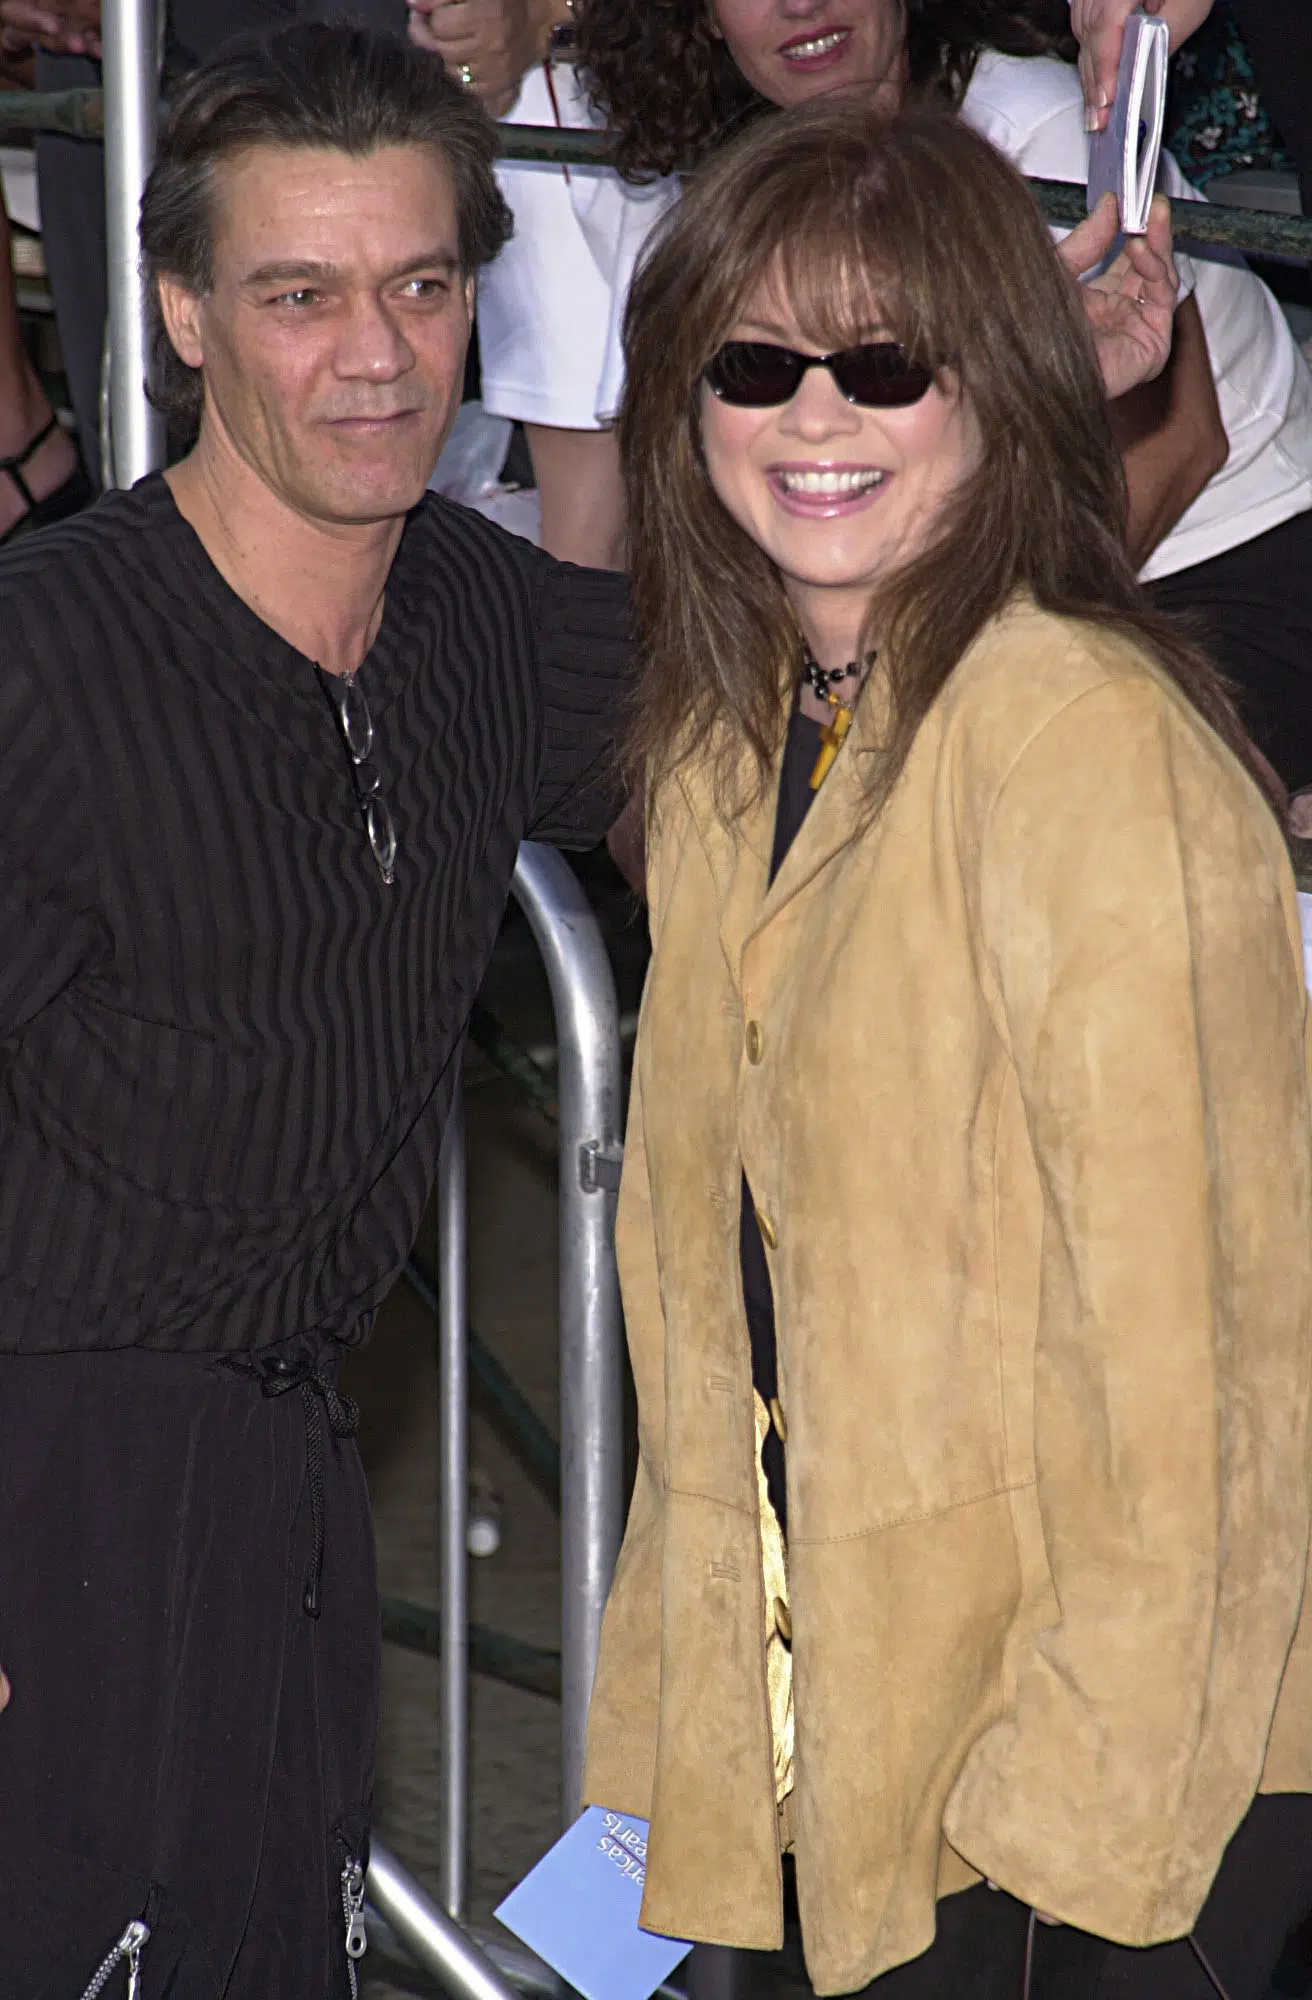 Eddie Van Halen and Valerie Bertinelli at the premiere of Revolution Studios and Columbia Picture's "America's Sweethearts" at Mann's Village Theater, Westwood, 07-17-01